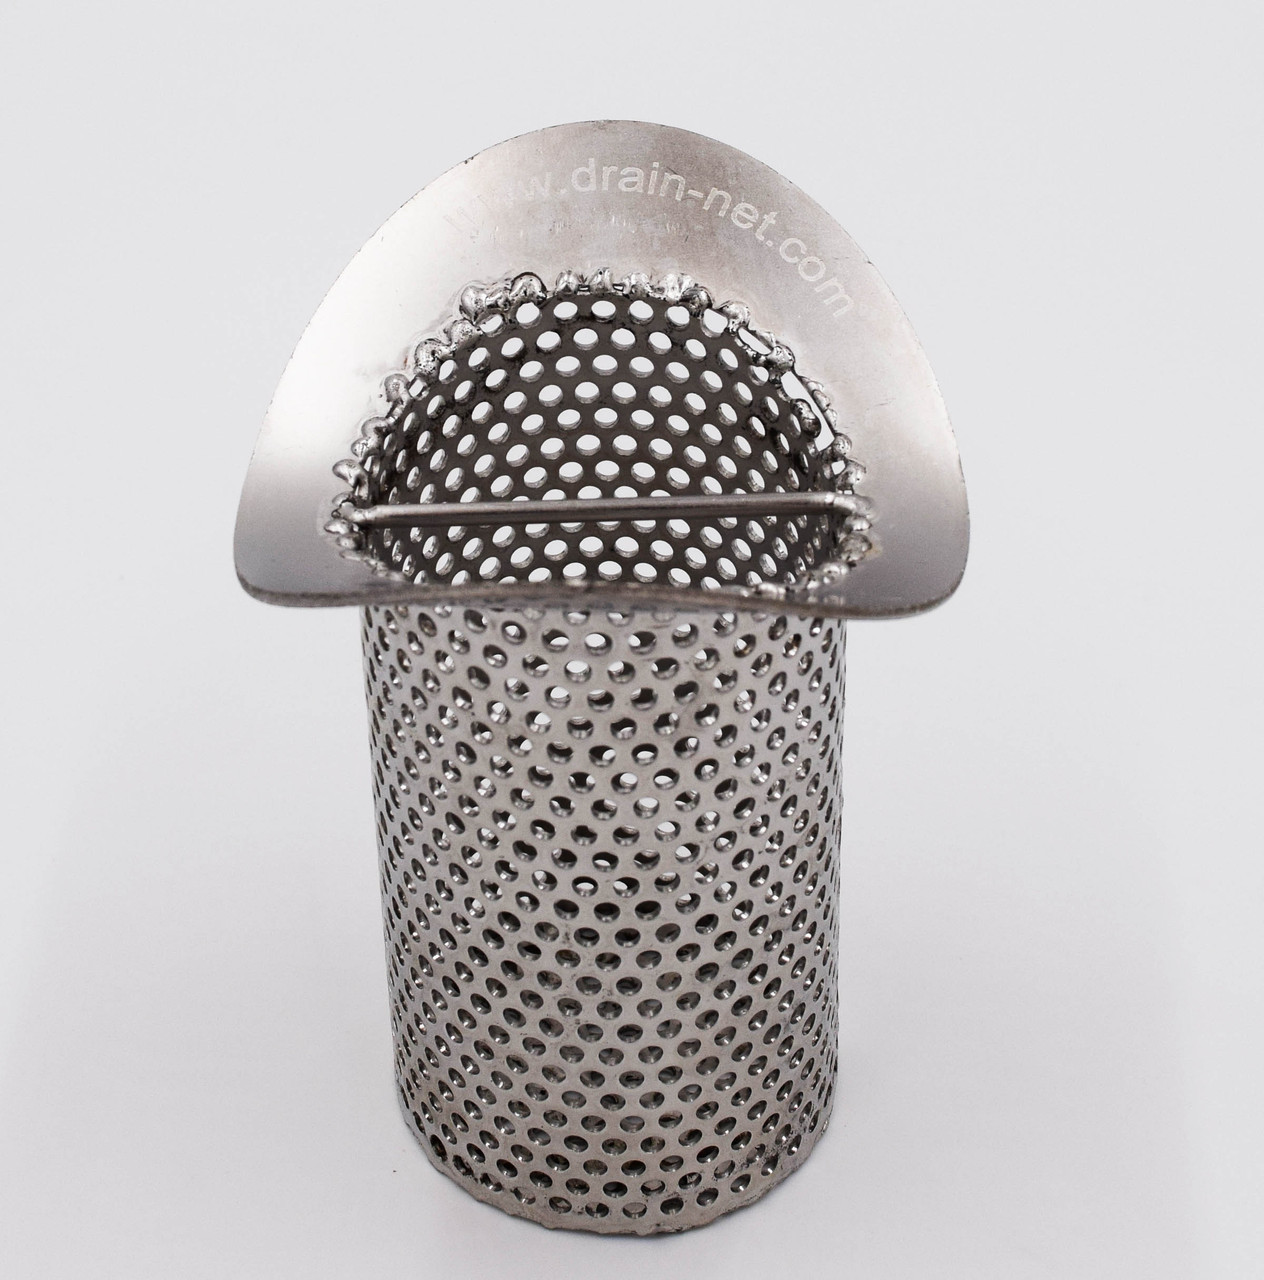 Curved stainless drain strainer